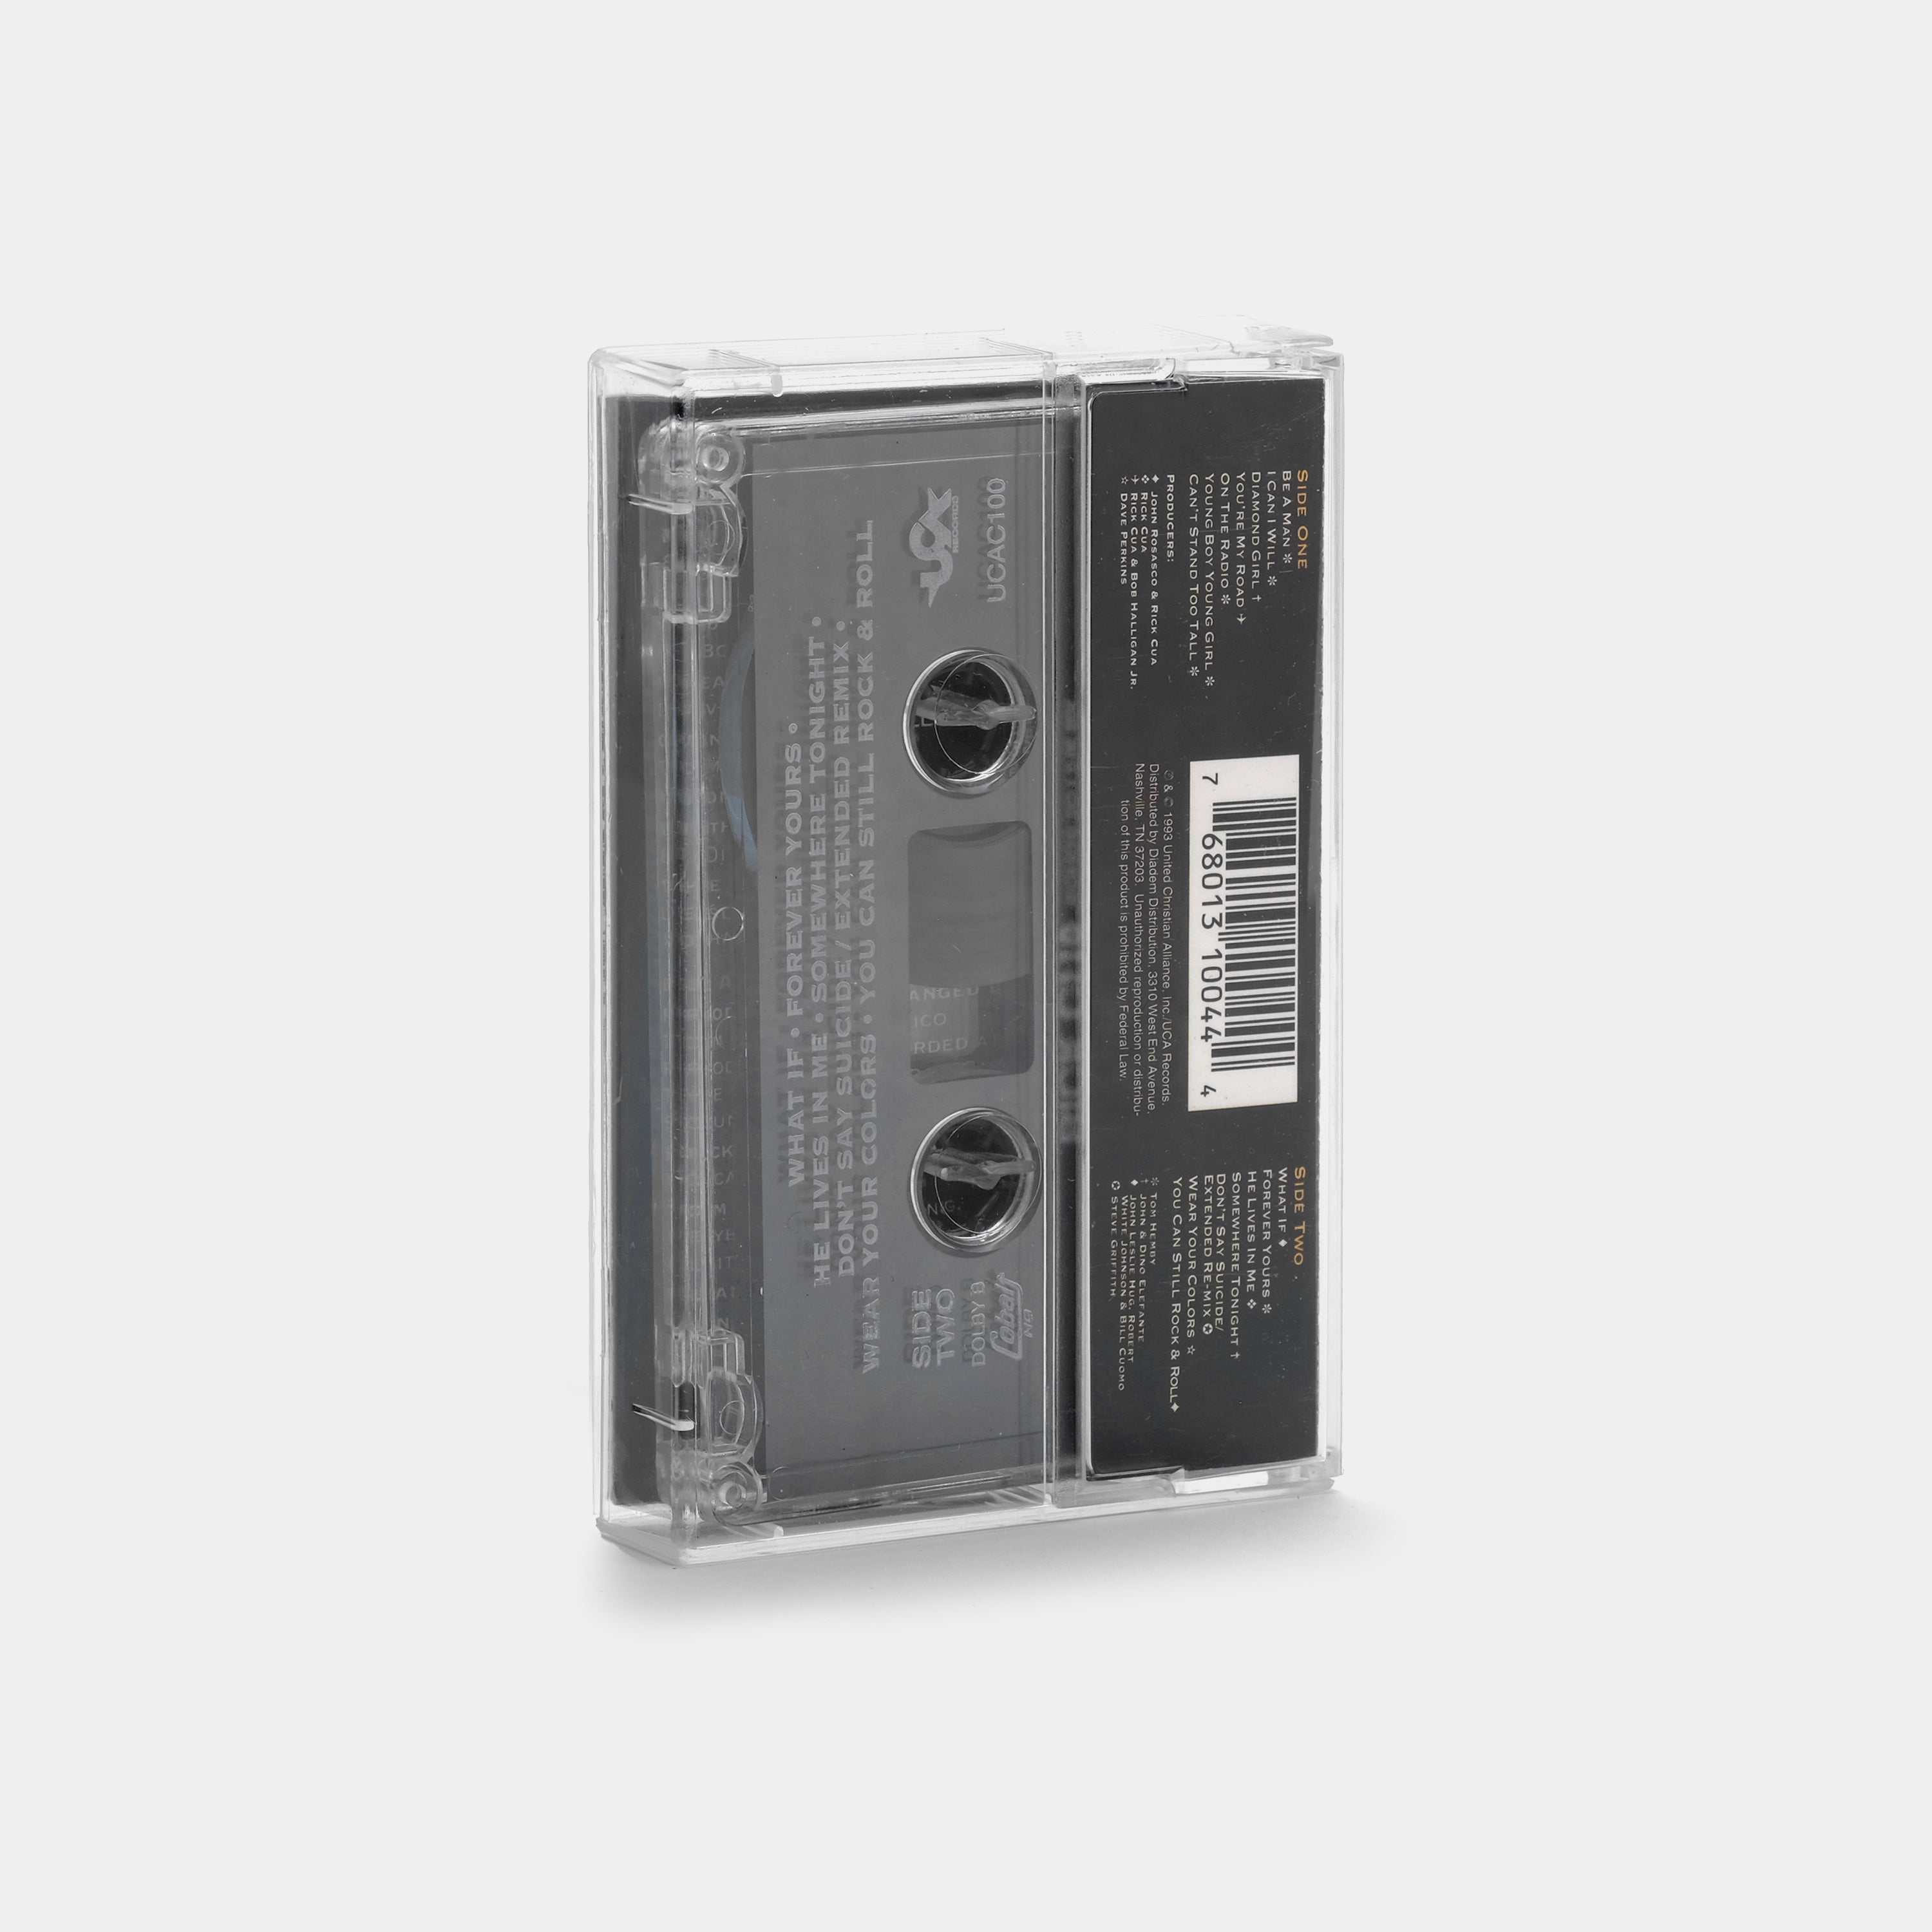 Rick Cua - Songs To Live By Cassette Tape